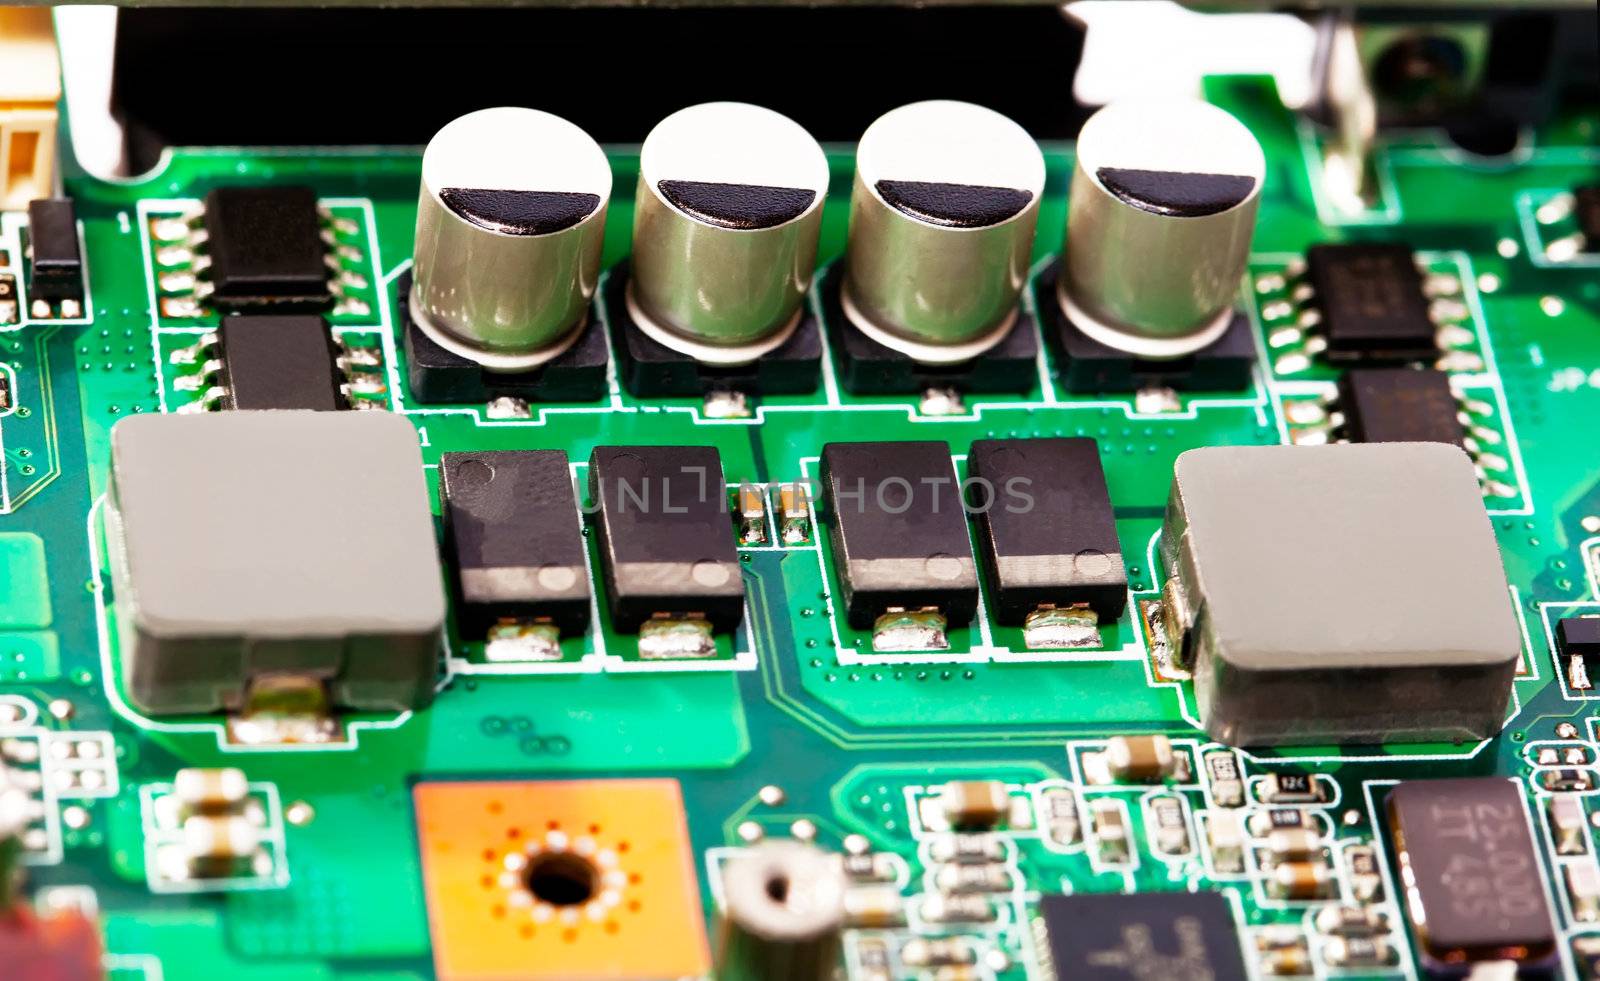 Condensator on green mother board by RawGroup